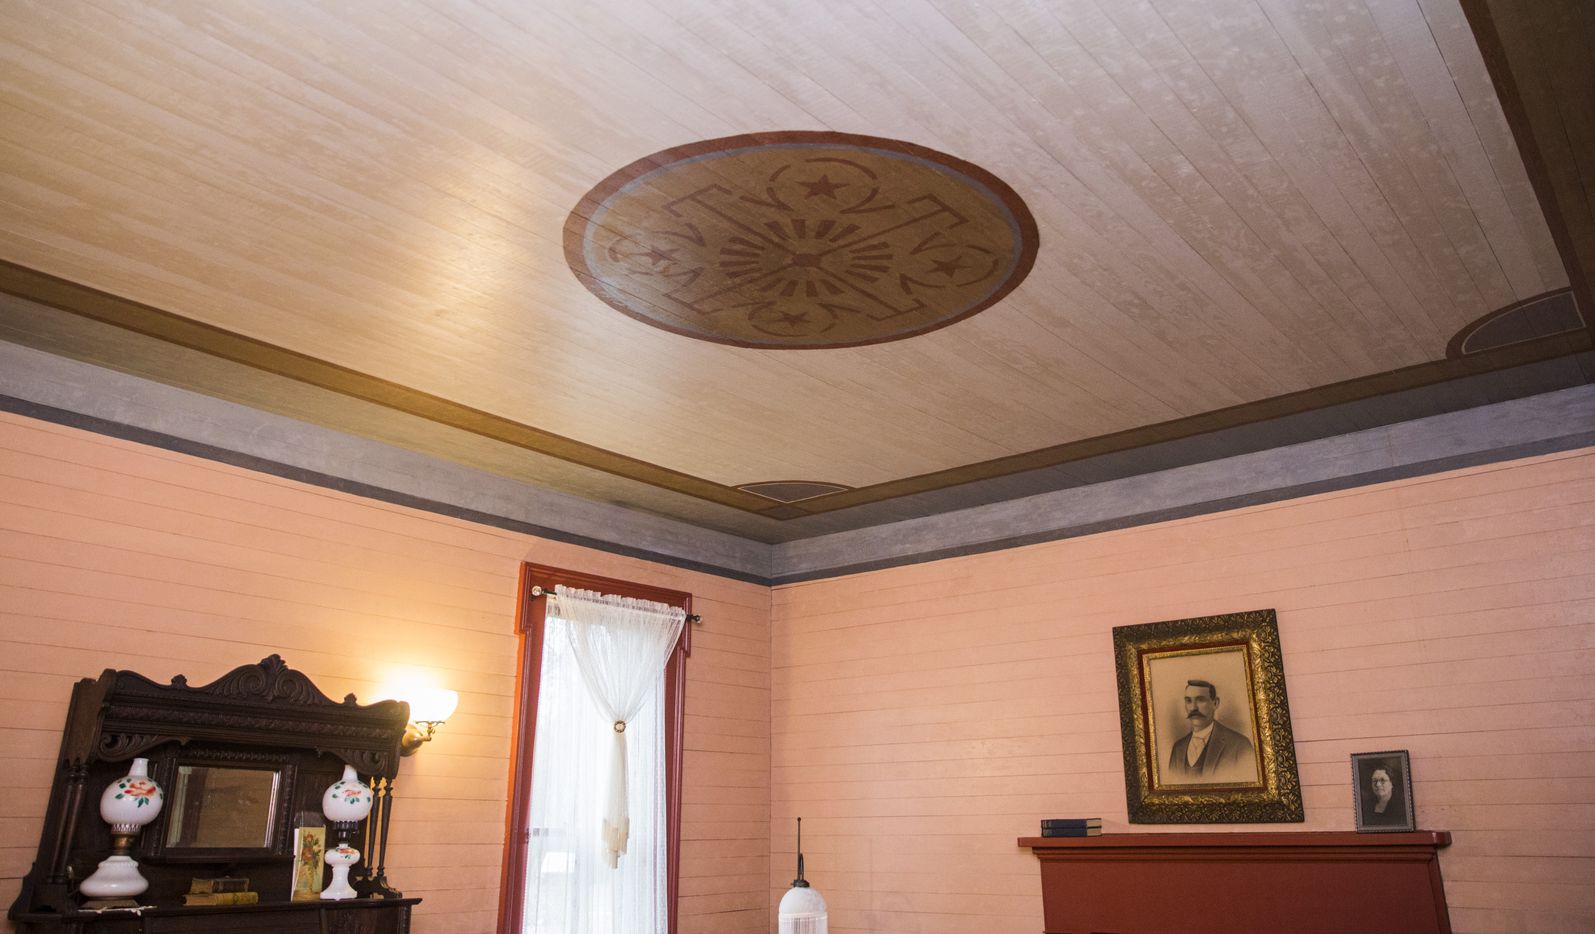 A painted ceiling in the music room inside the Lawrence House was among the discoveries that...